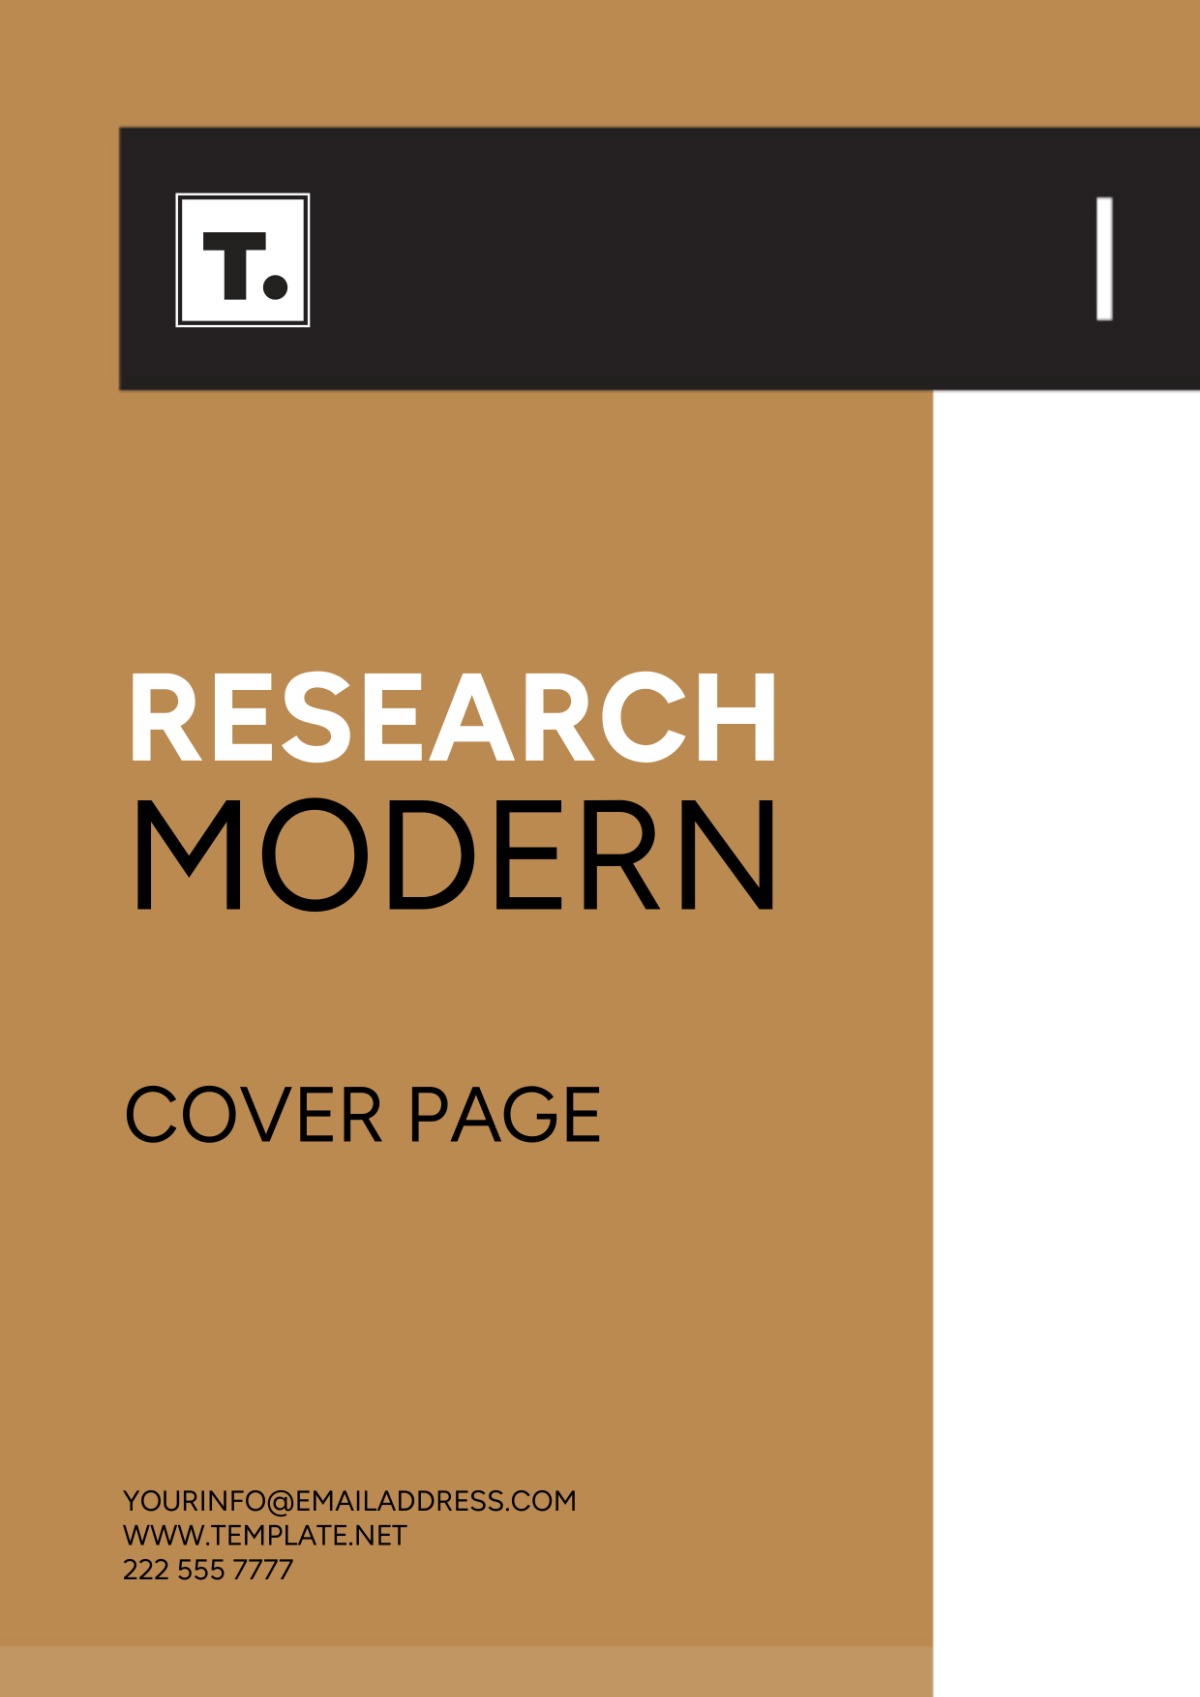 Free Research Modern Cover Page Template